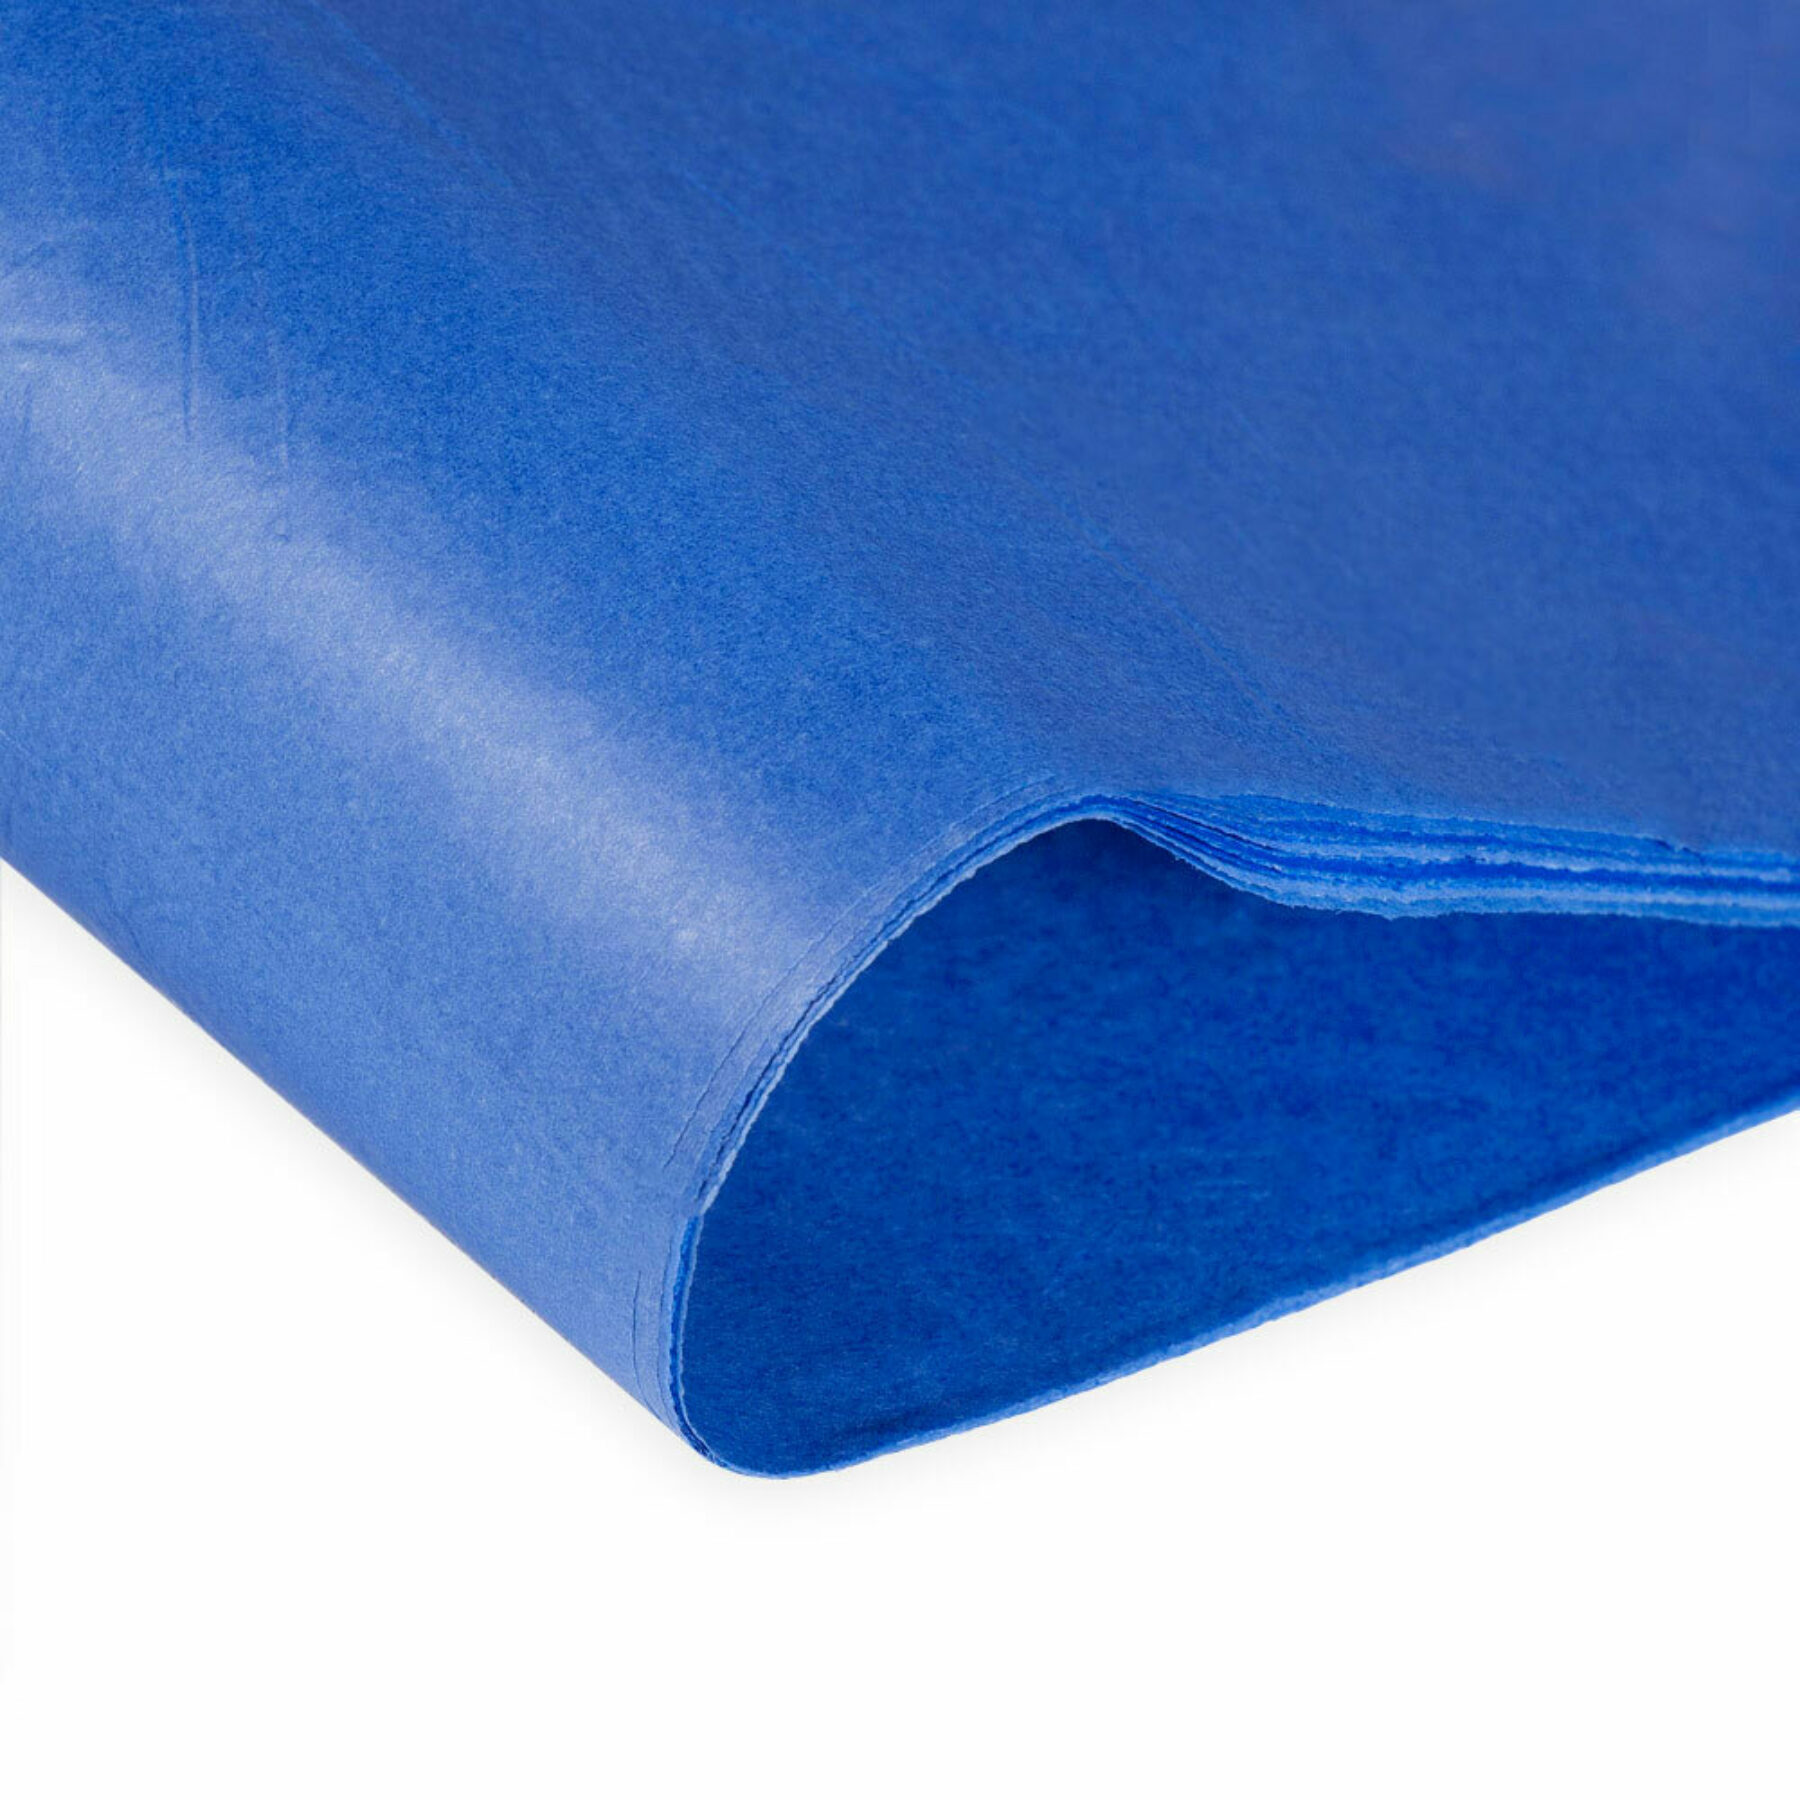 PA067 Blue Tissue Paper (480 sheets)